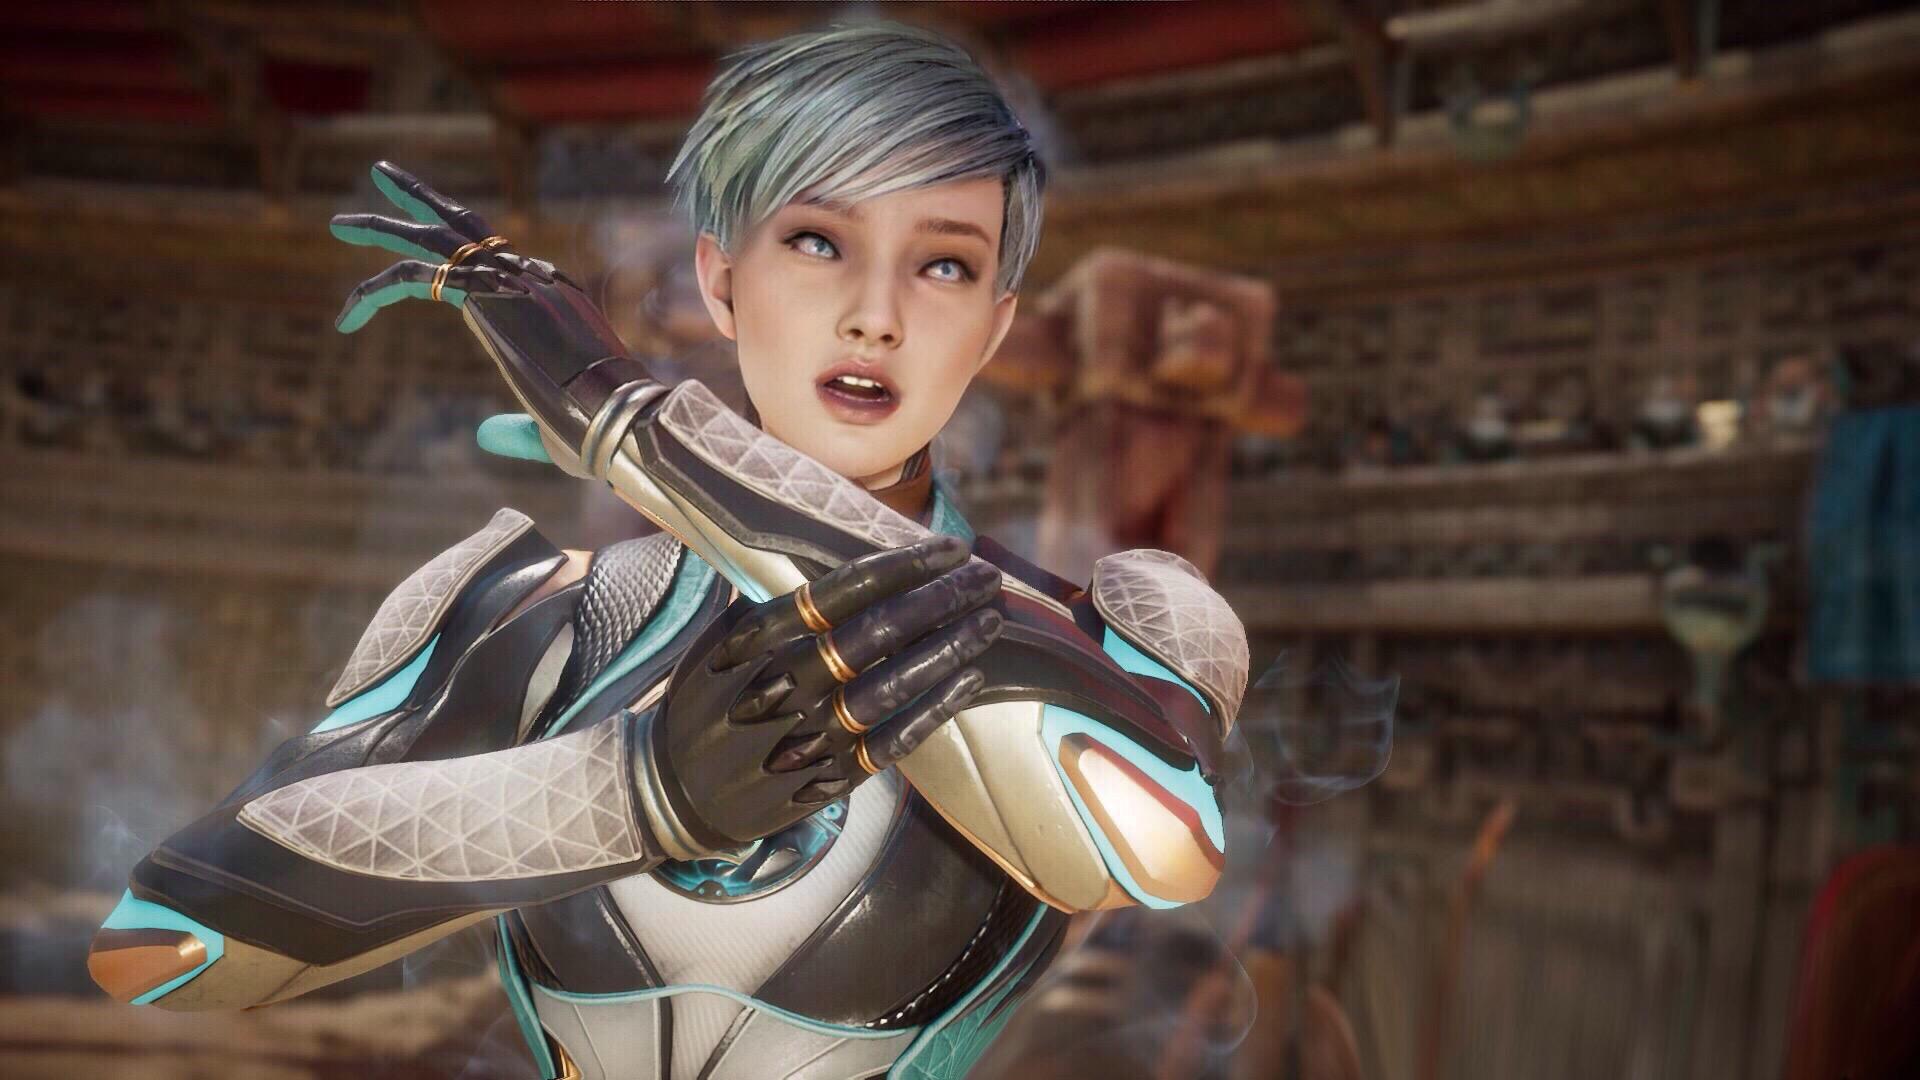 A fully let down hairstyle for frost ❄️: MortalKombat